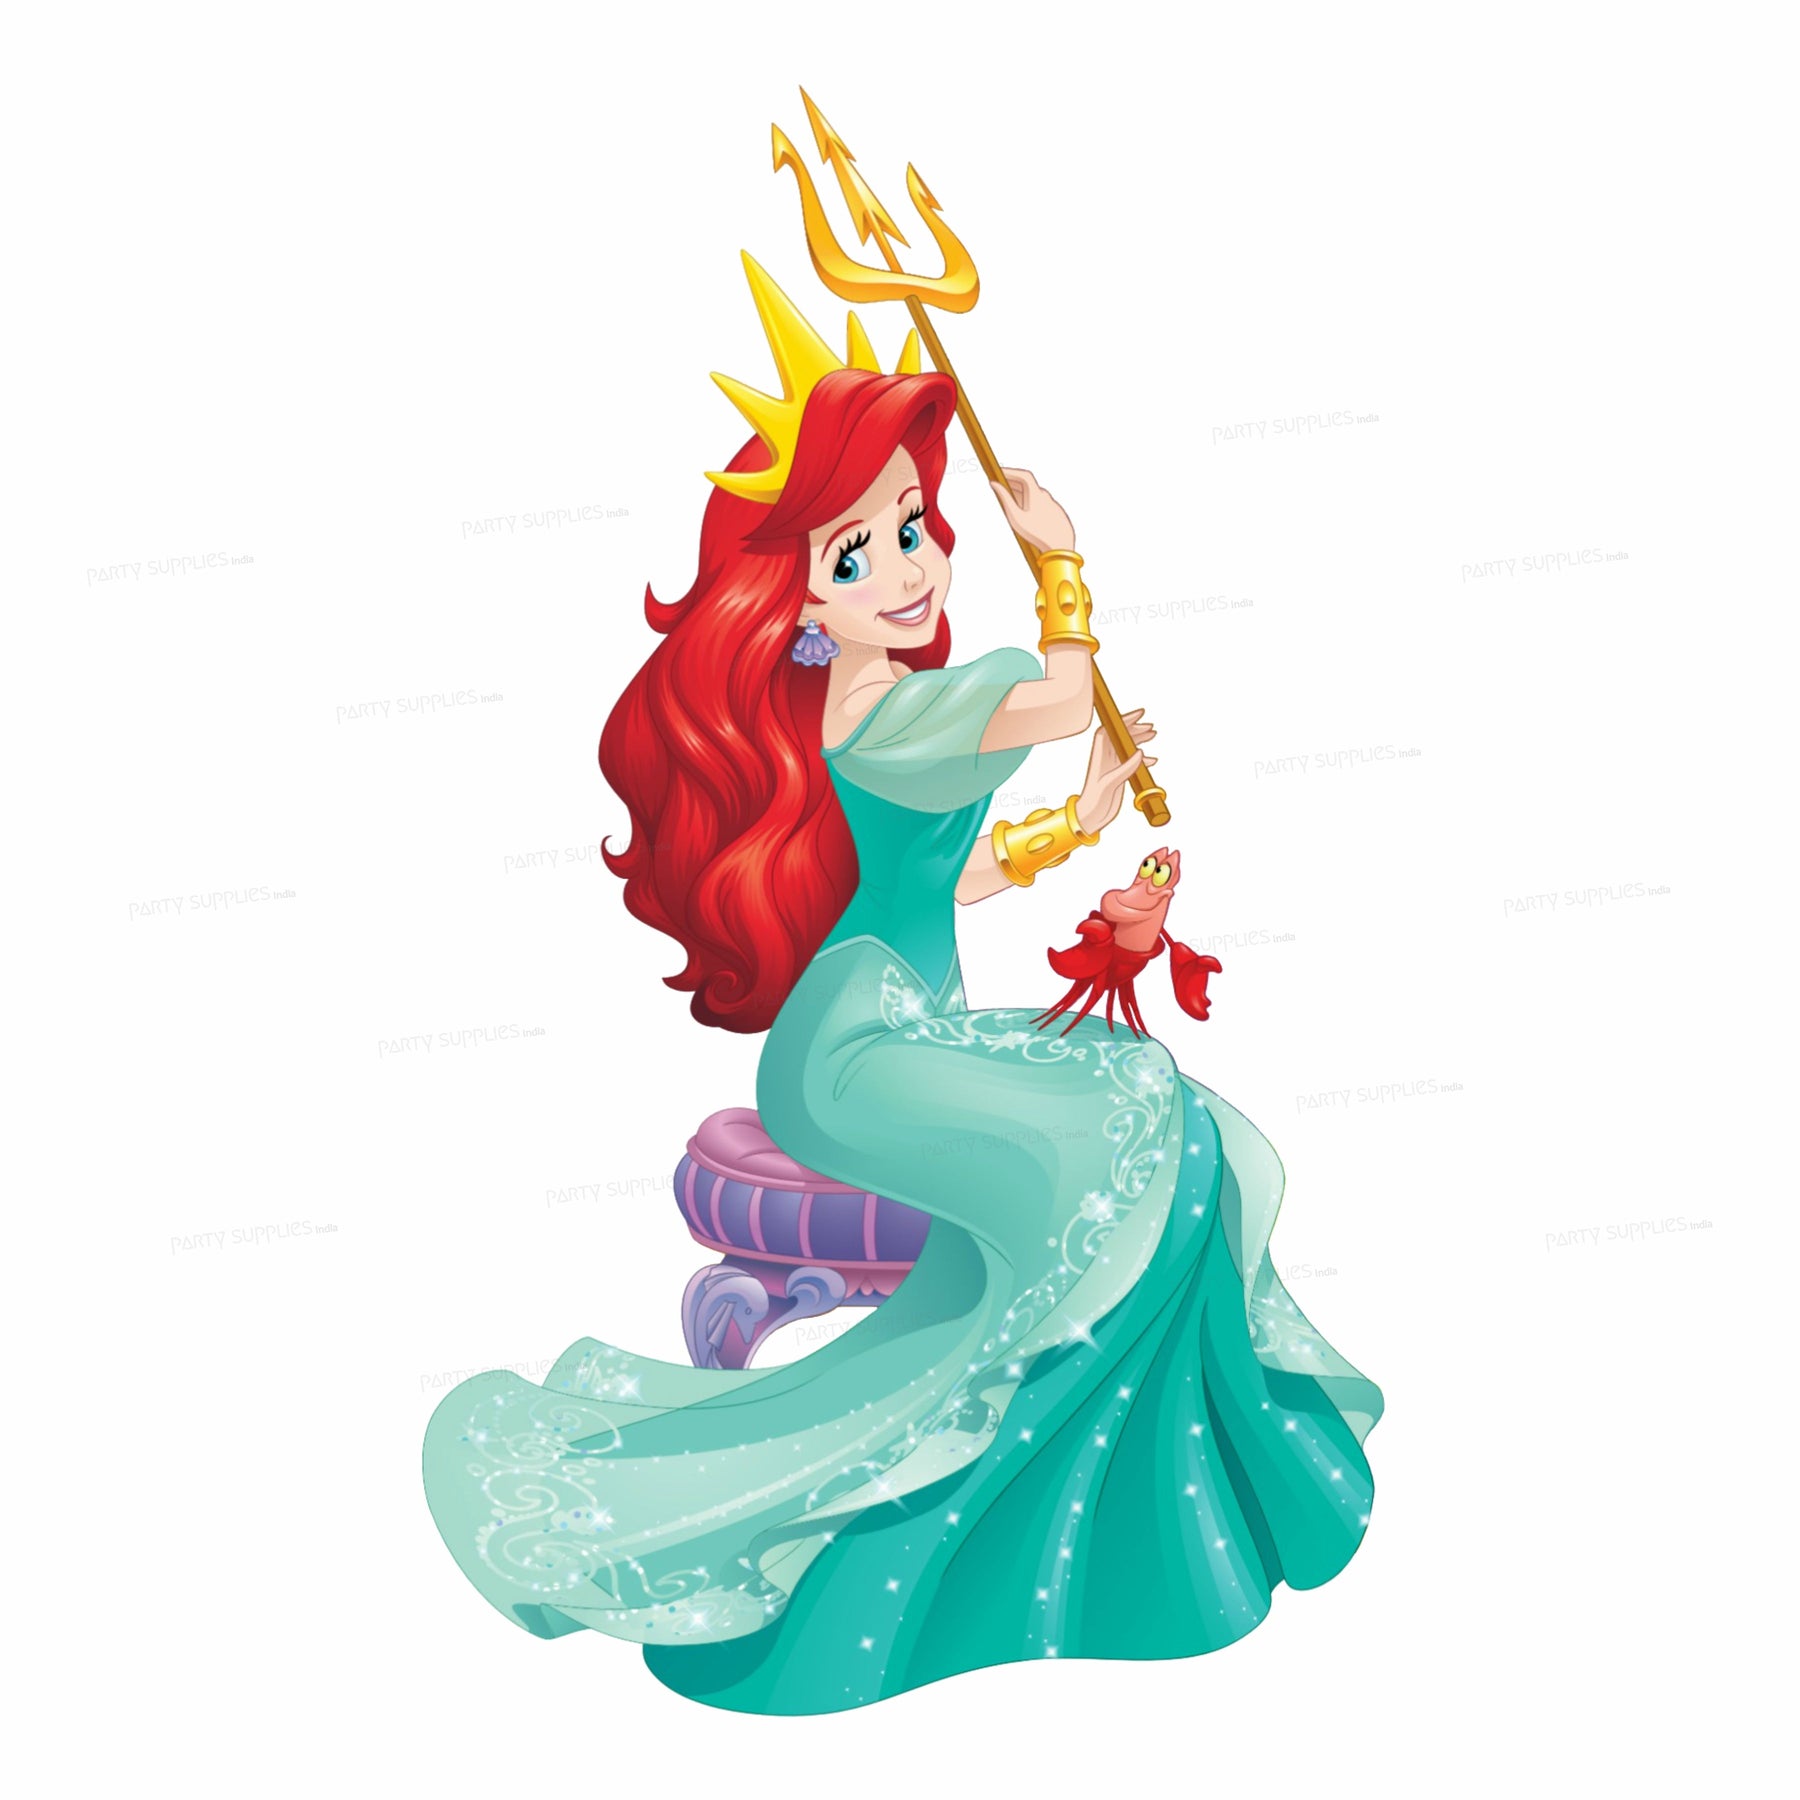 Mermaid Theme with Trident Cutout